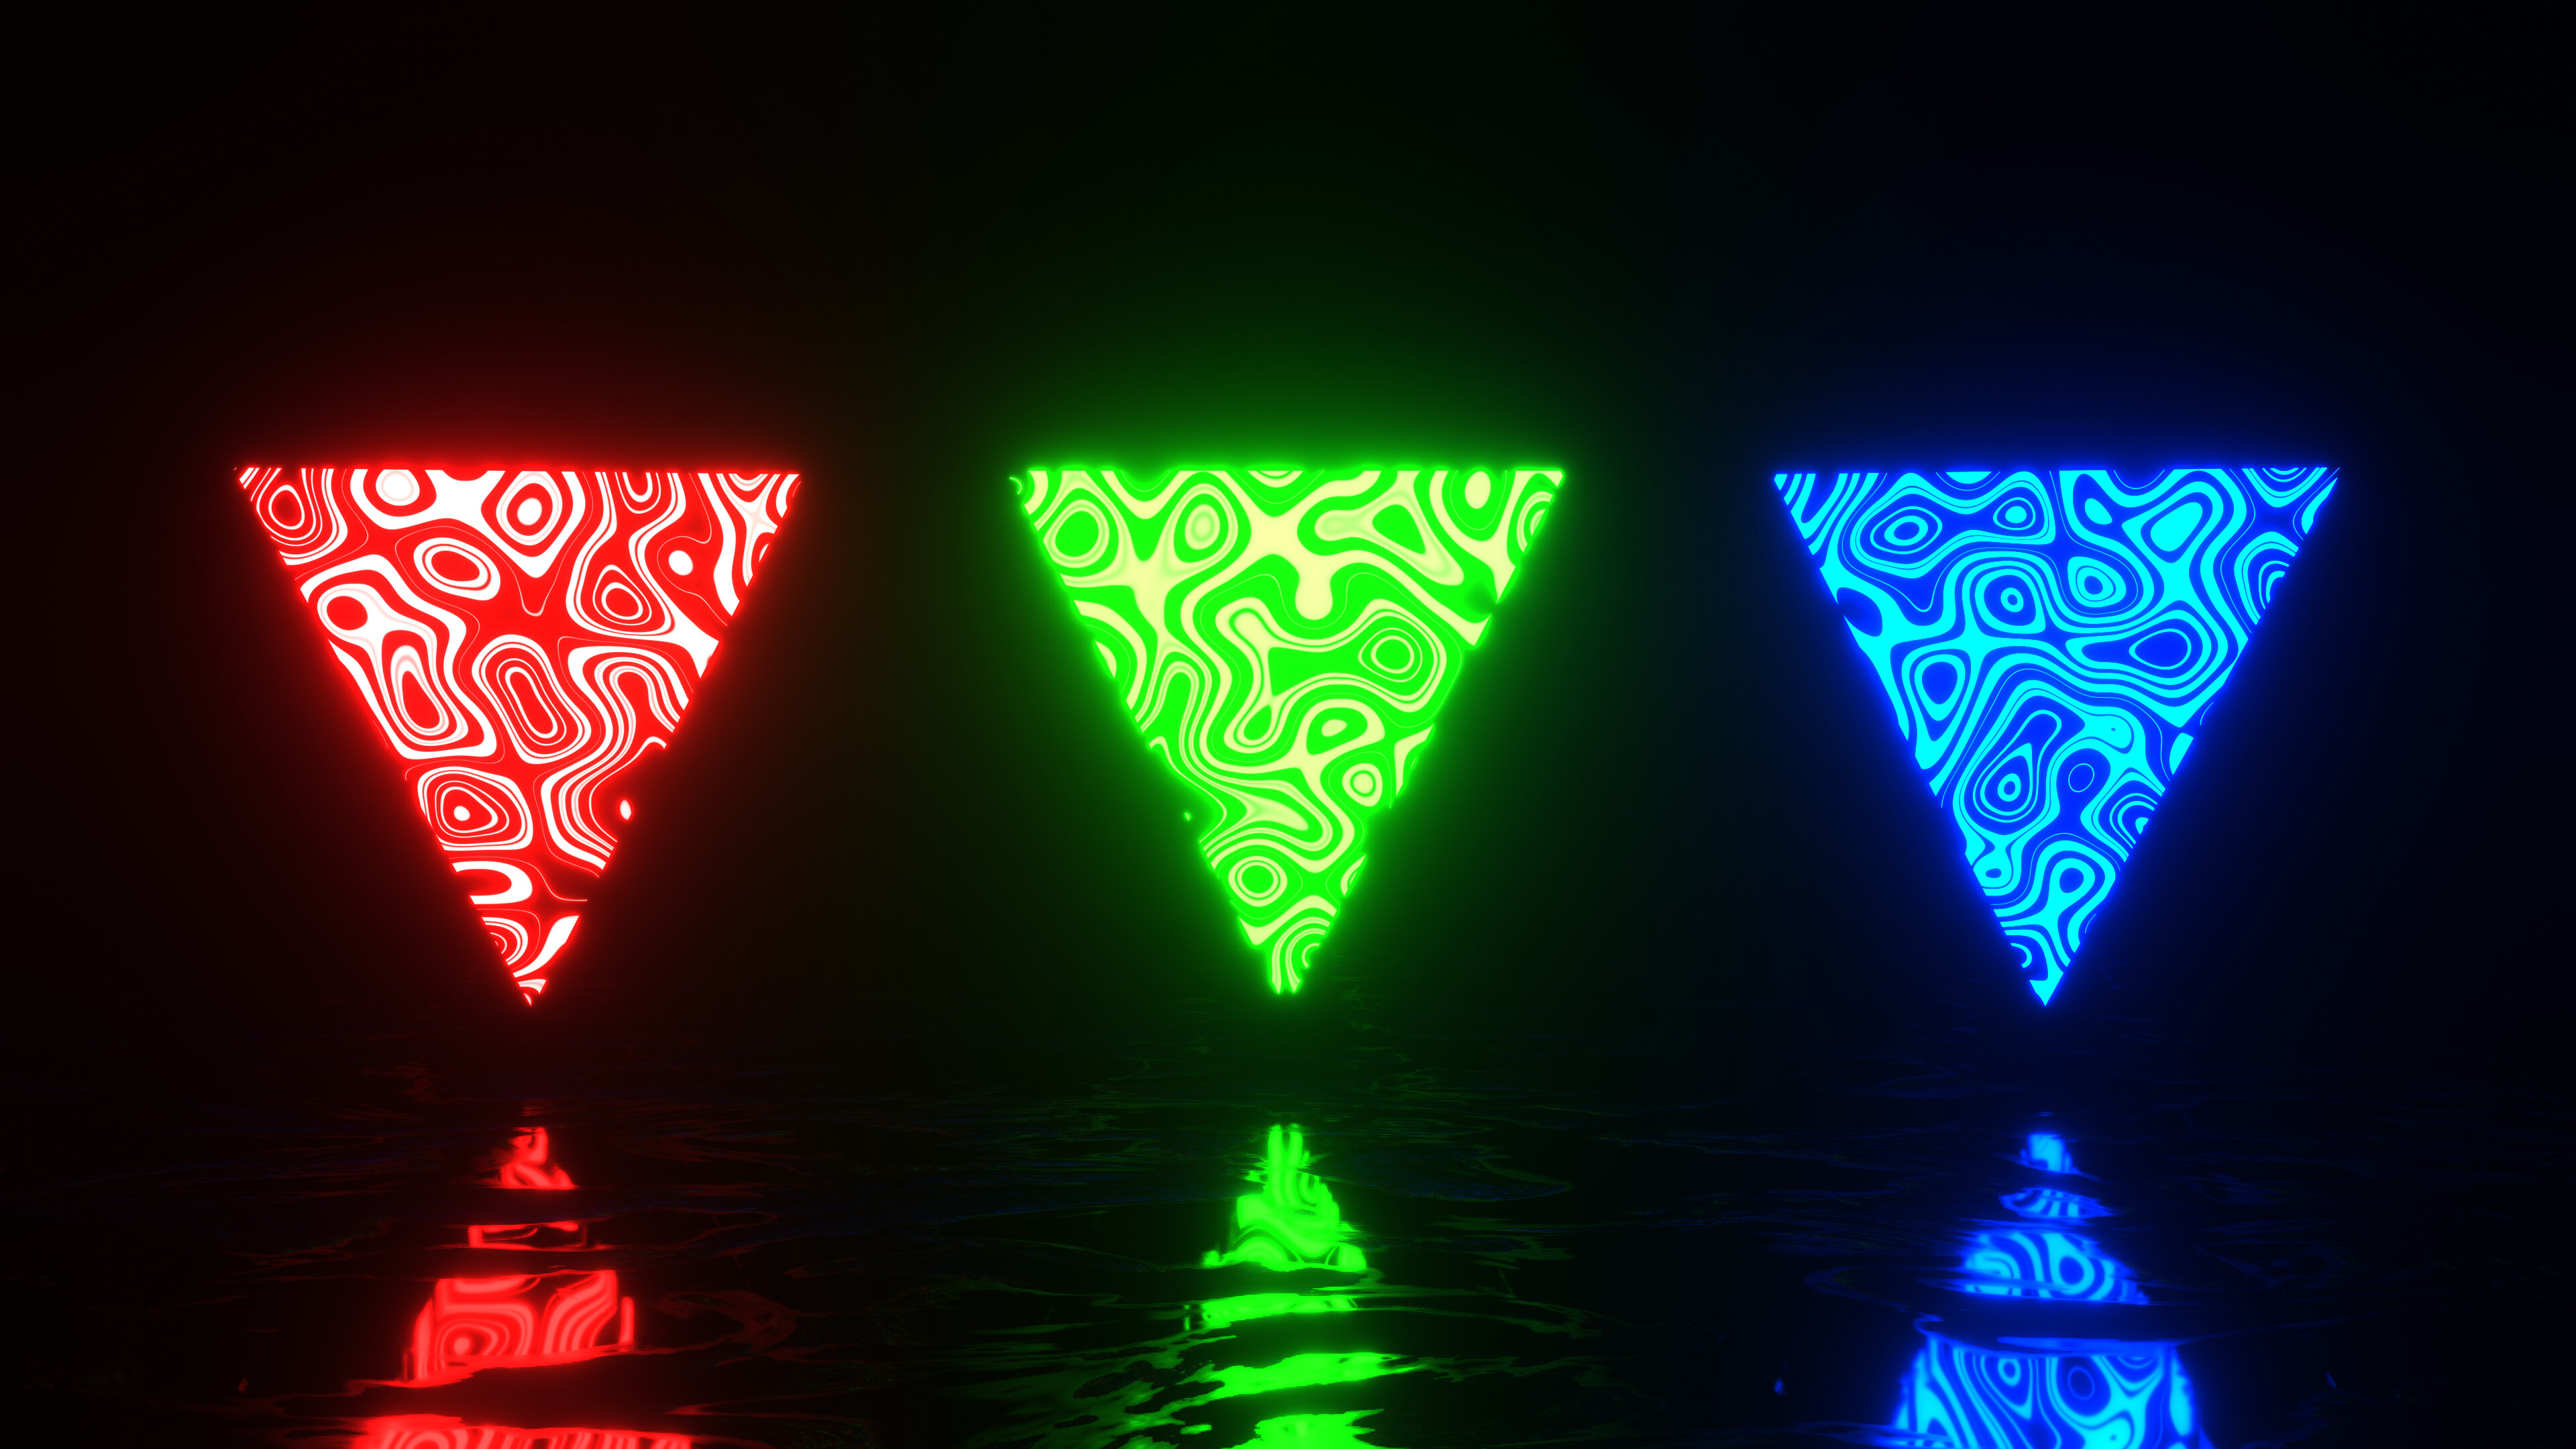 Triangle: Artistic geometric figures, Neon reflections, Abstract patterns. 3840x2160 4K Wallpaper.